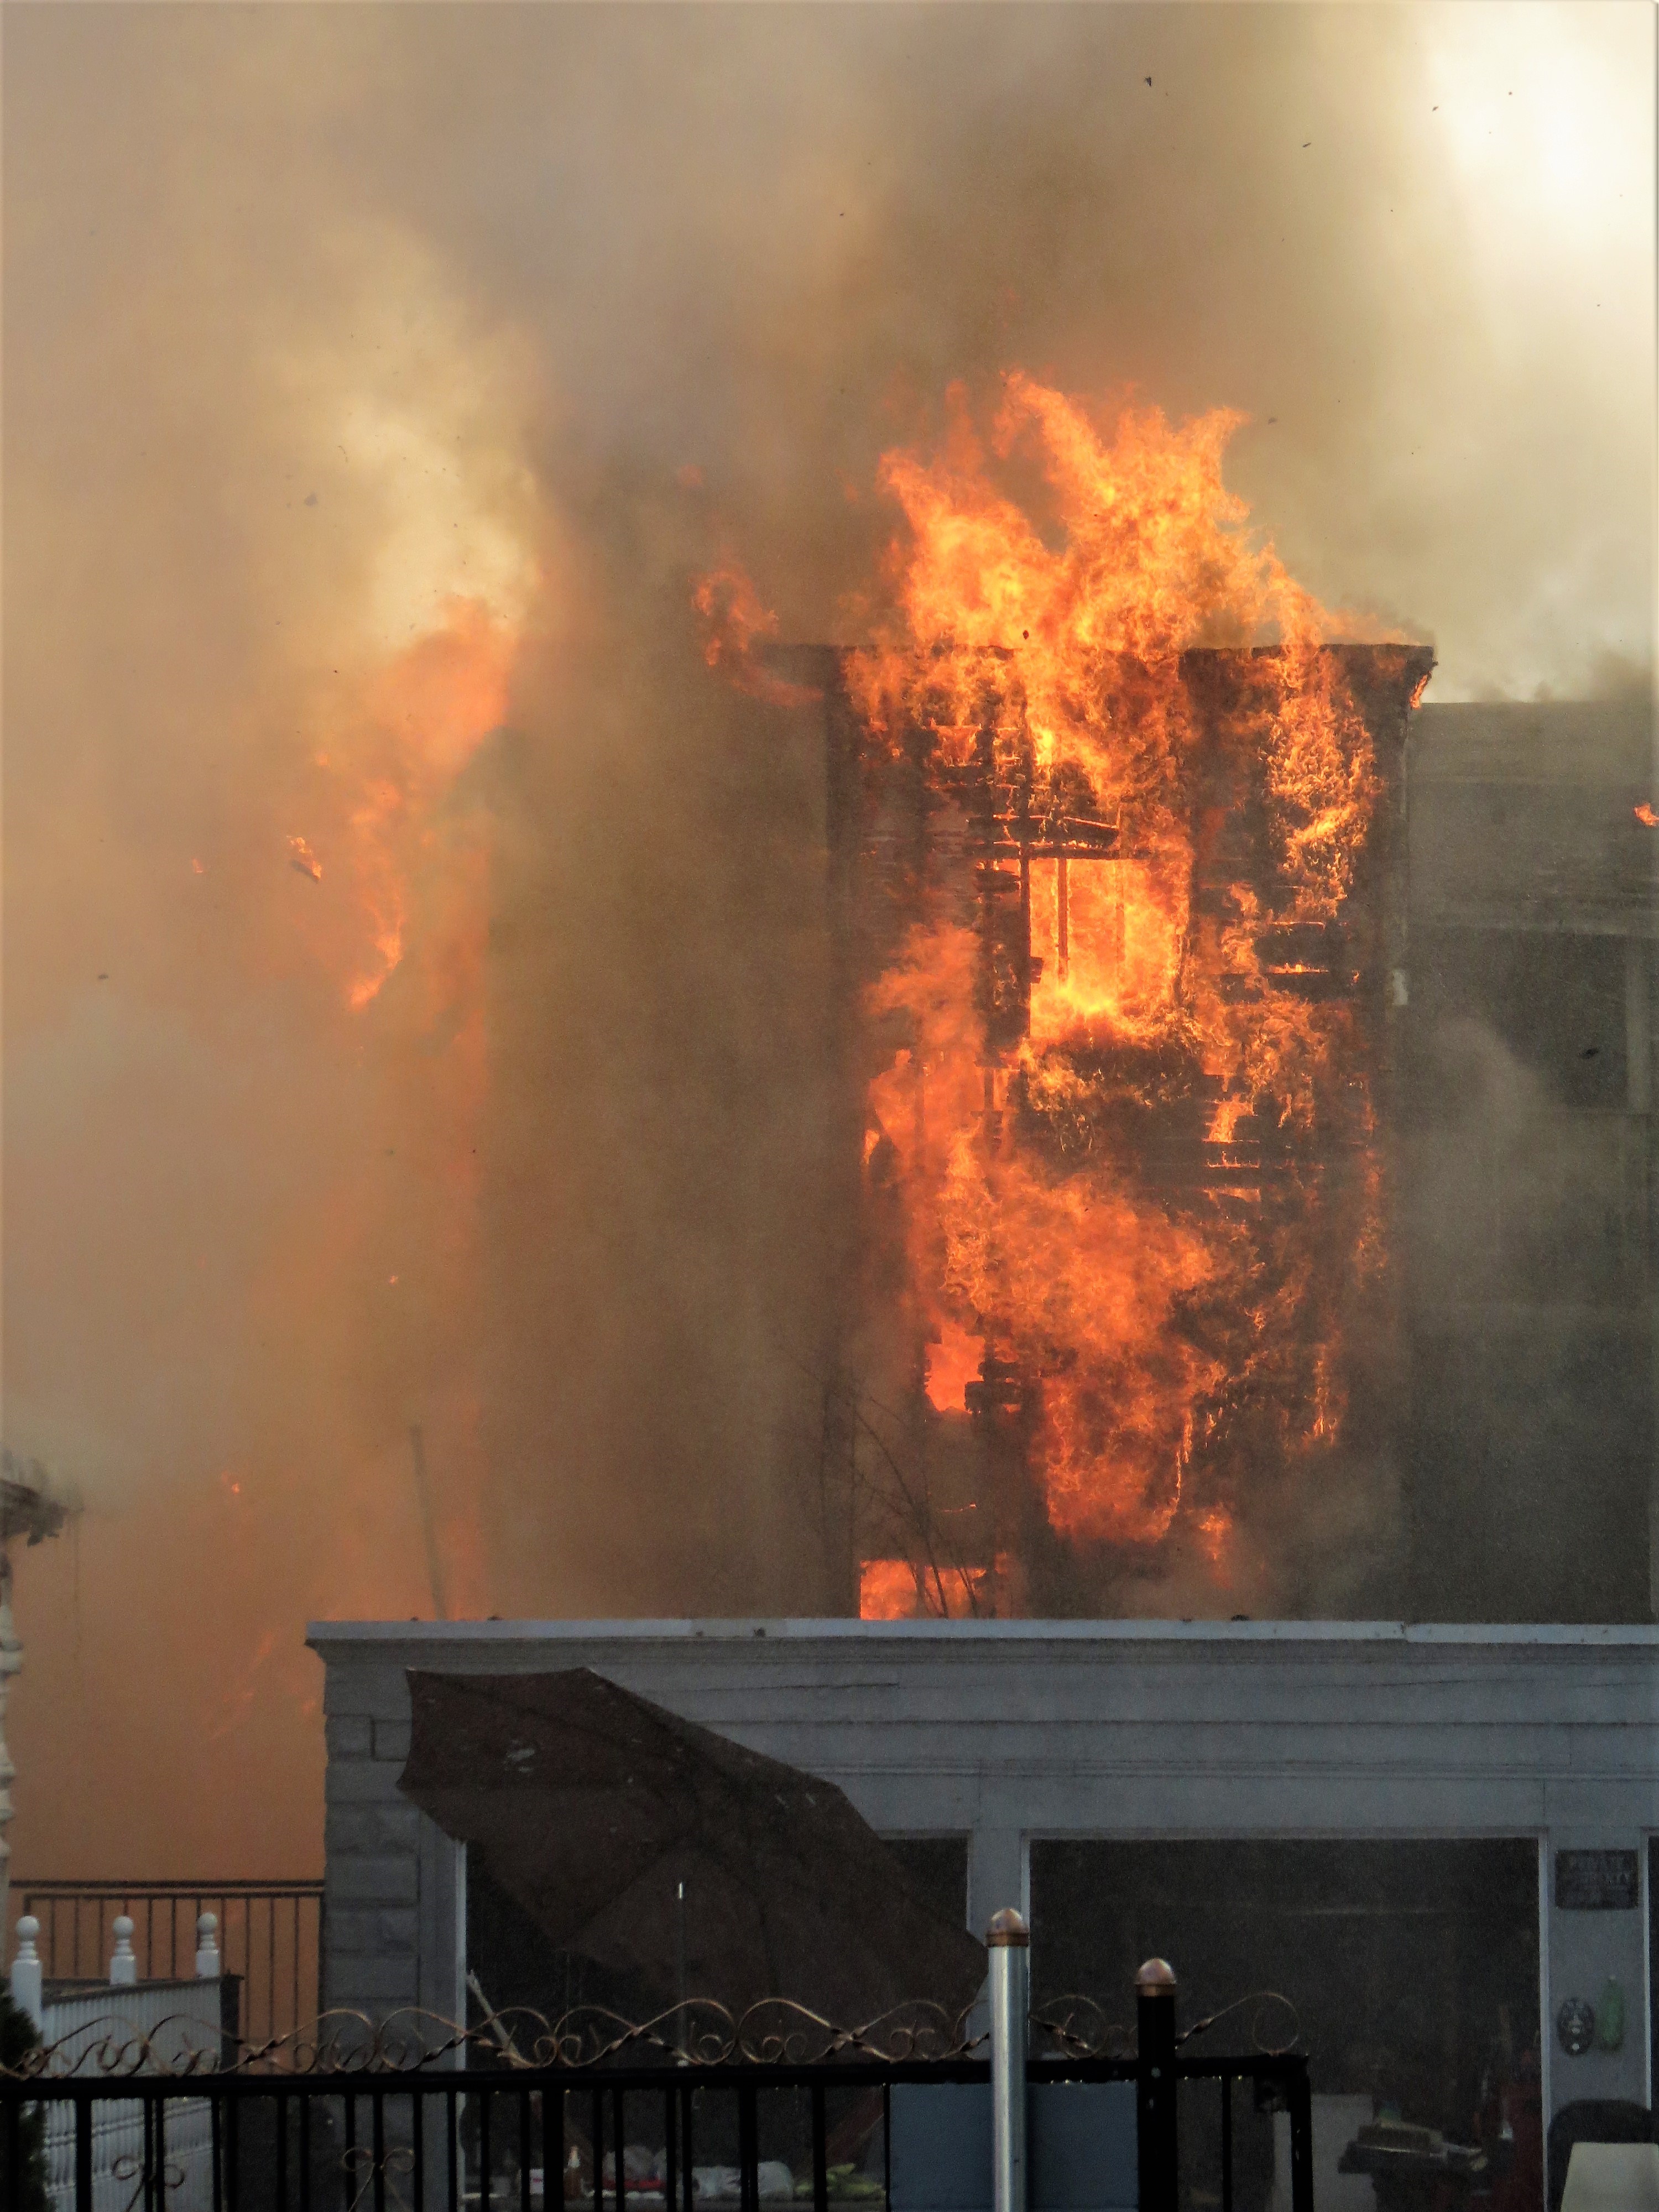 7 Alarm Fire in Lawrence Involving Eight Structures